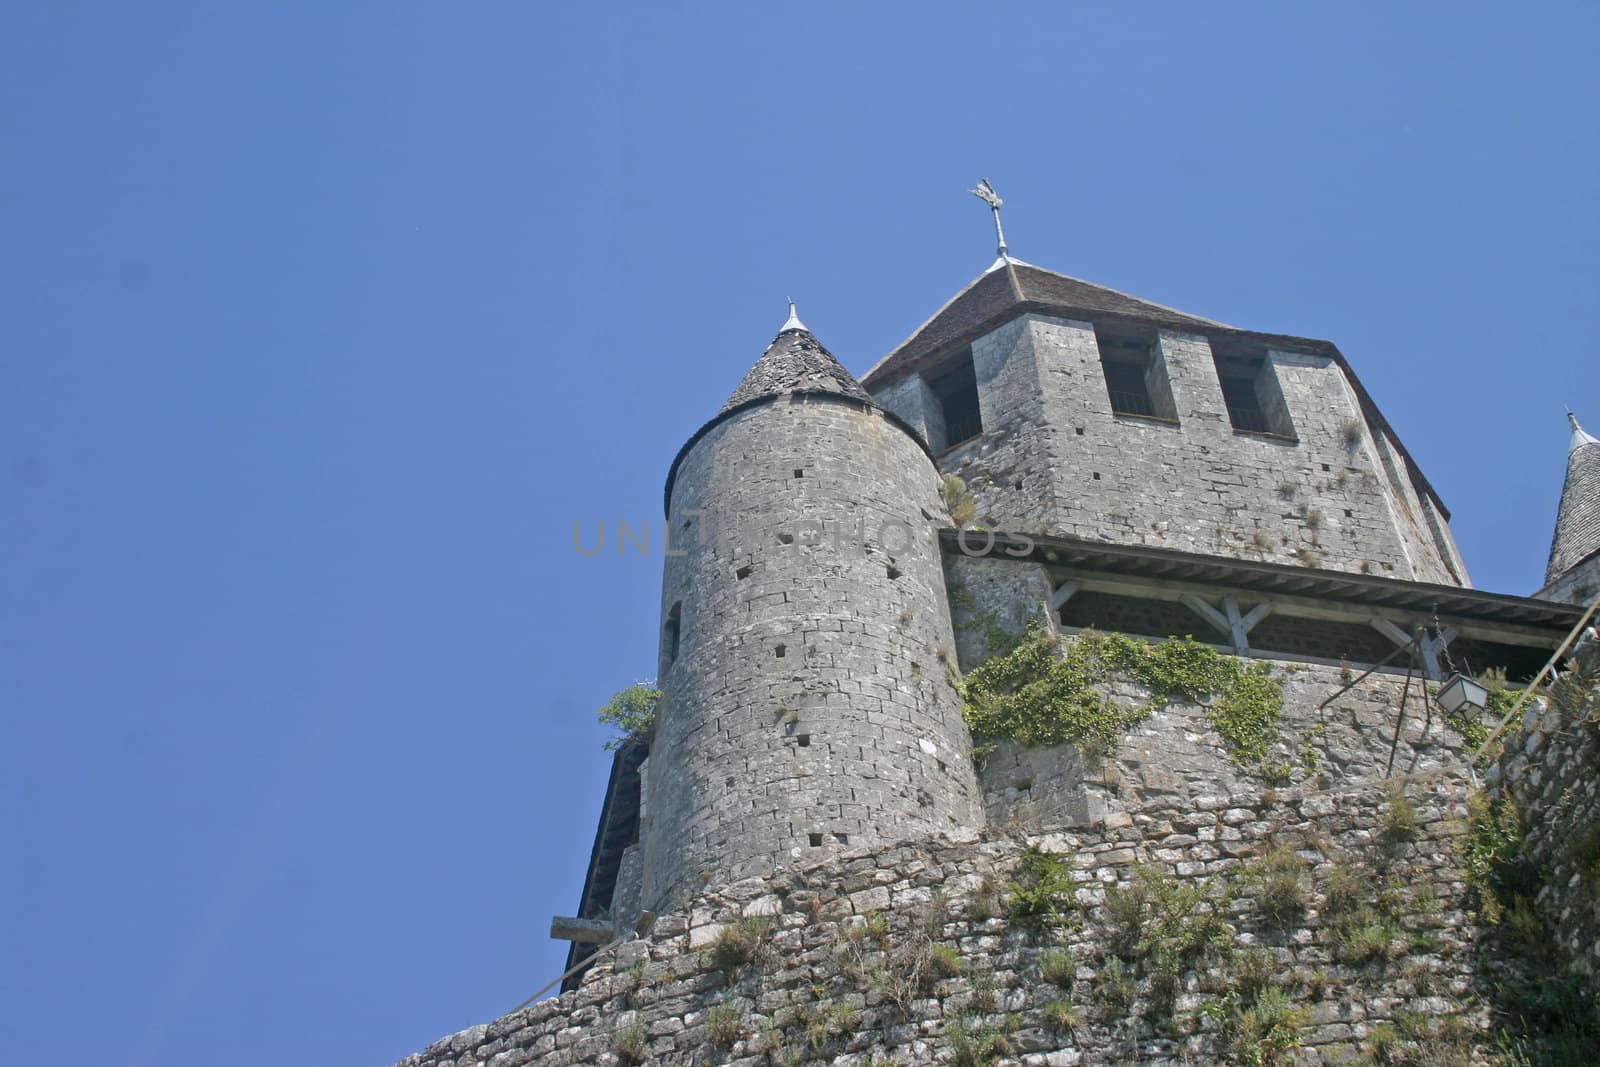 Caesars Tower in Provins France by green308